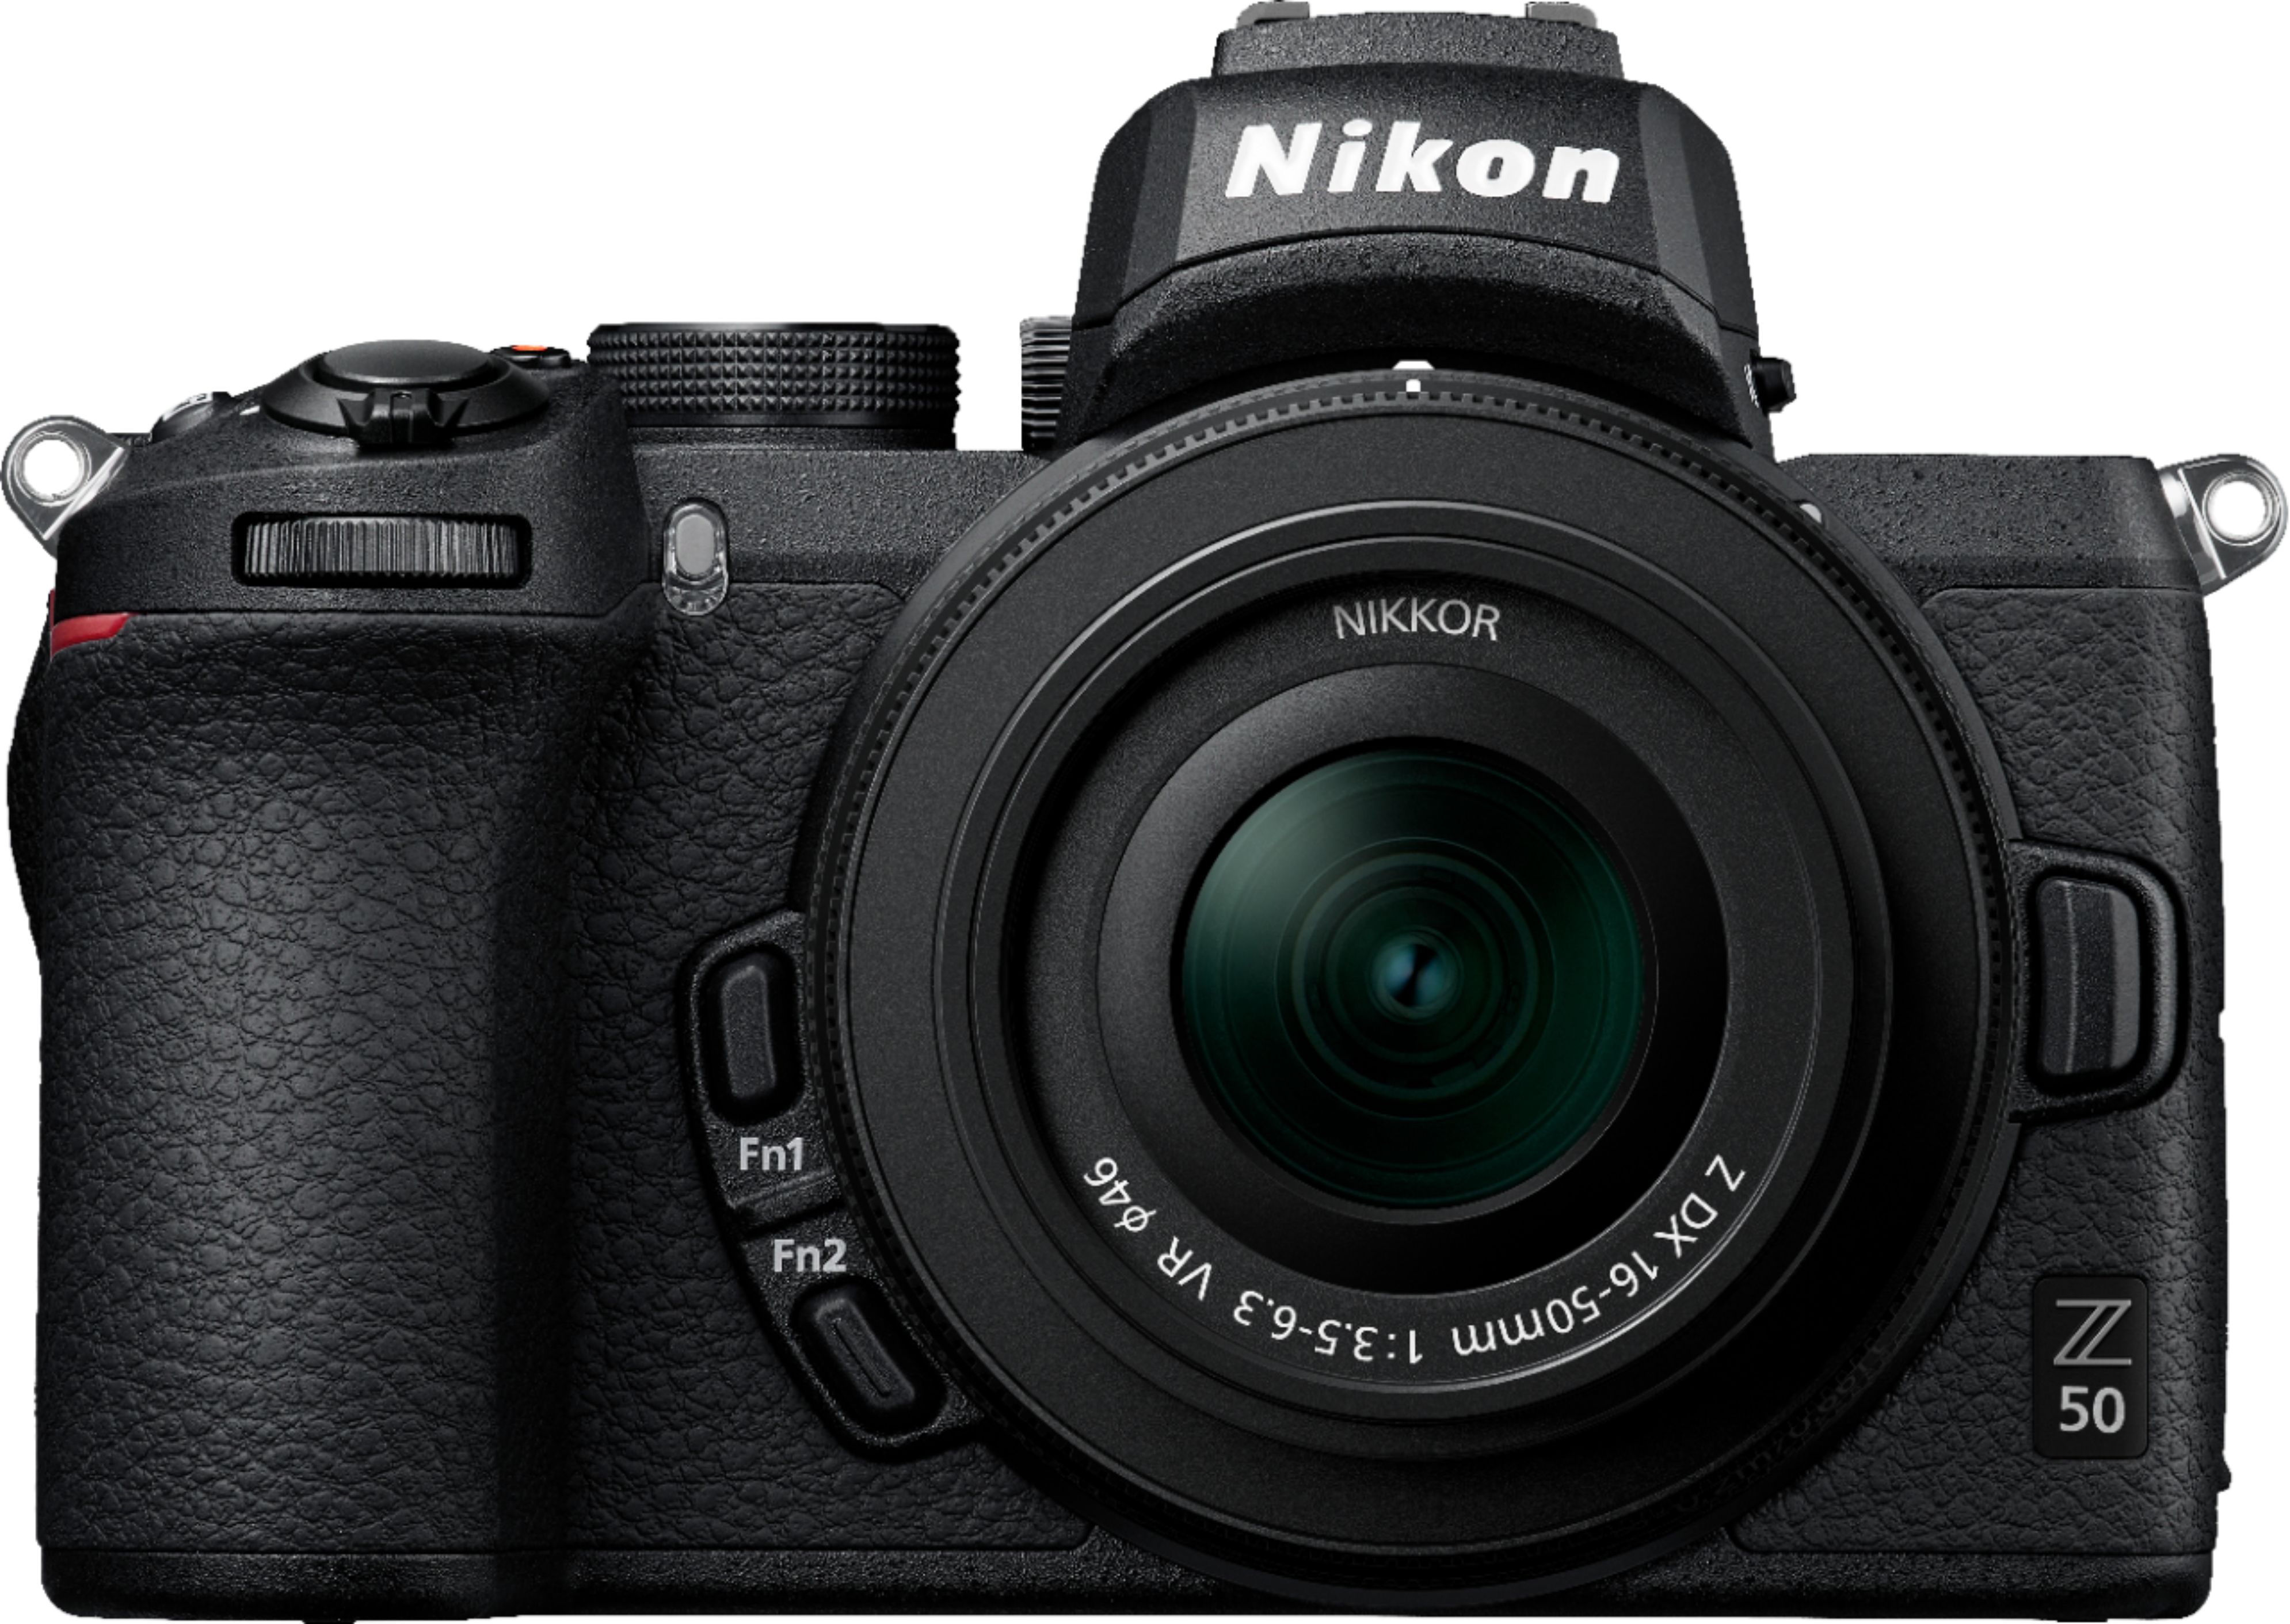 Angle View: Nikon - D5600 DSLR Video Two Lens Kit with 18-55mm and 70-300mm Lenses - Black